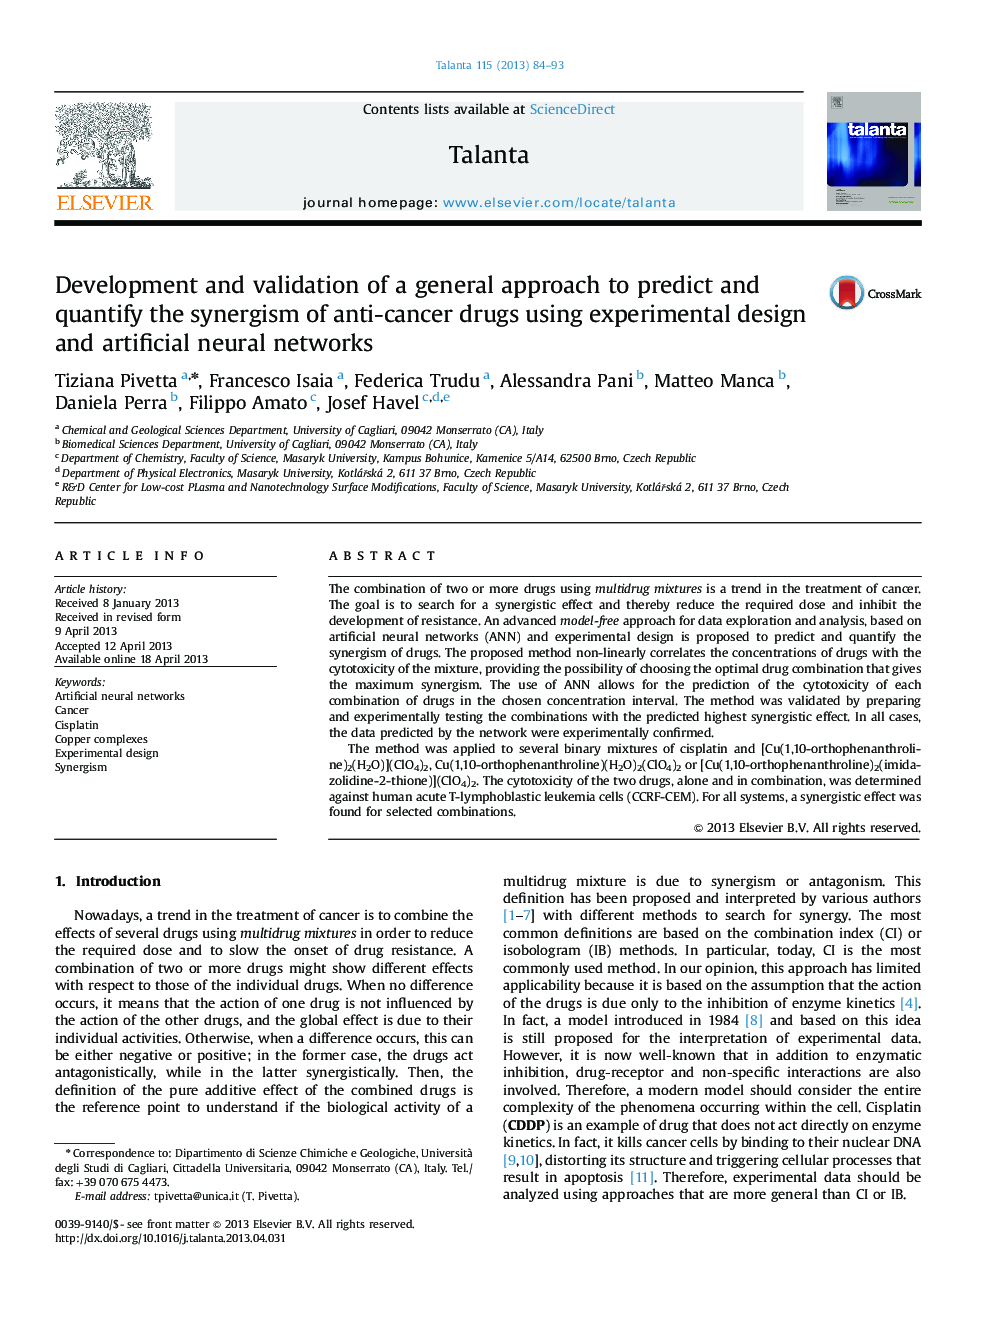 Development and validation of a general approach to predict and quantify the synergism of anti-cancer drugs using experimental design and artificial neural networks